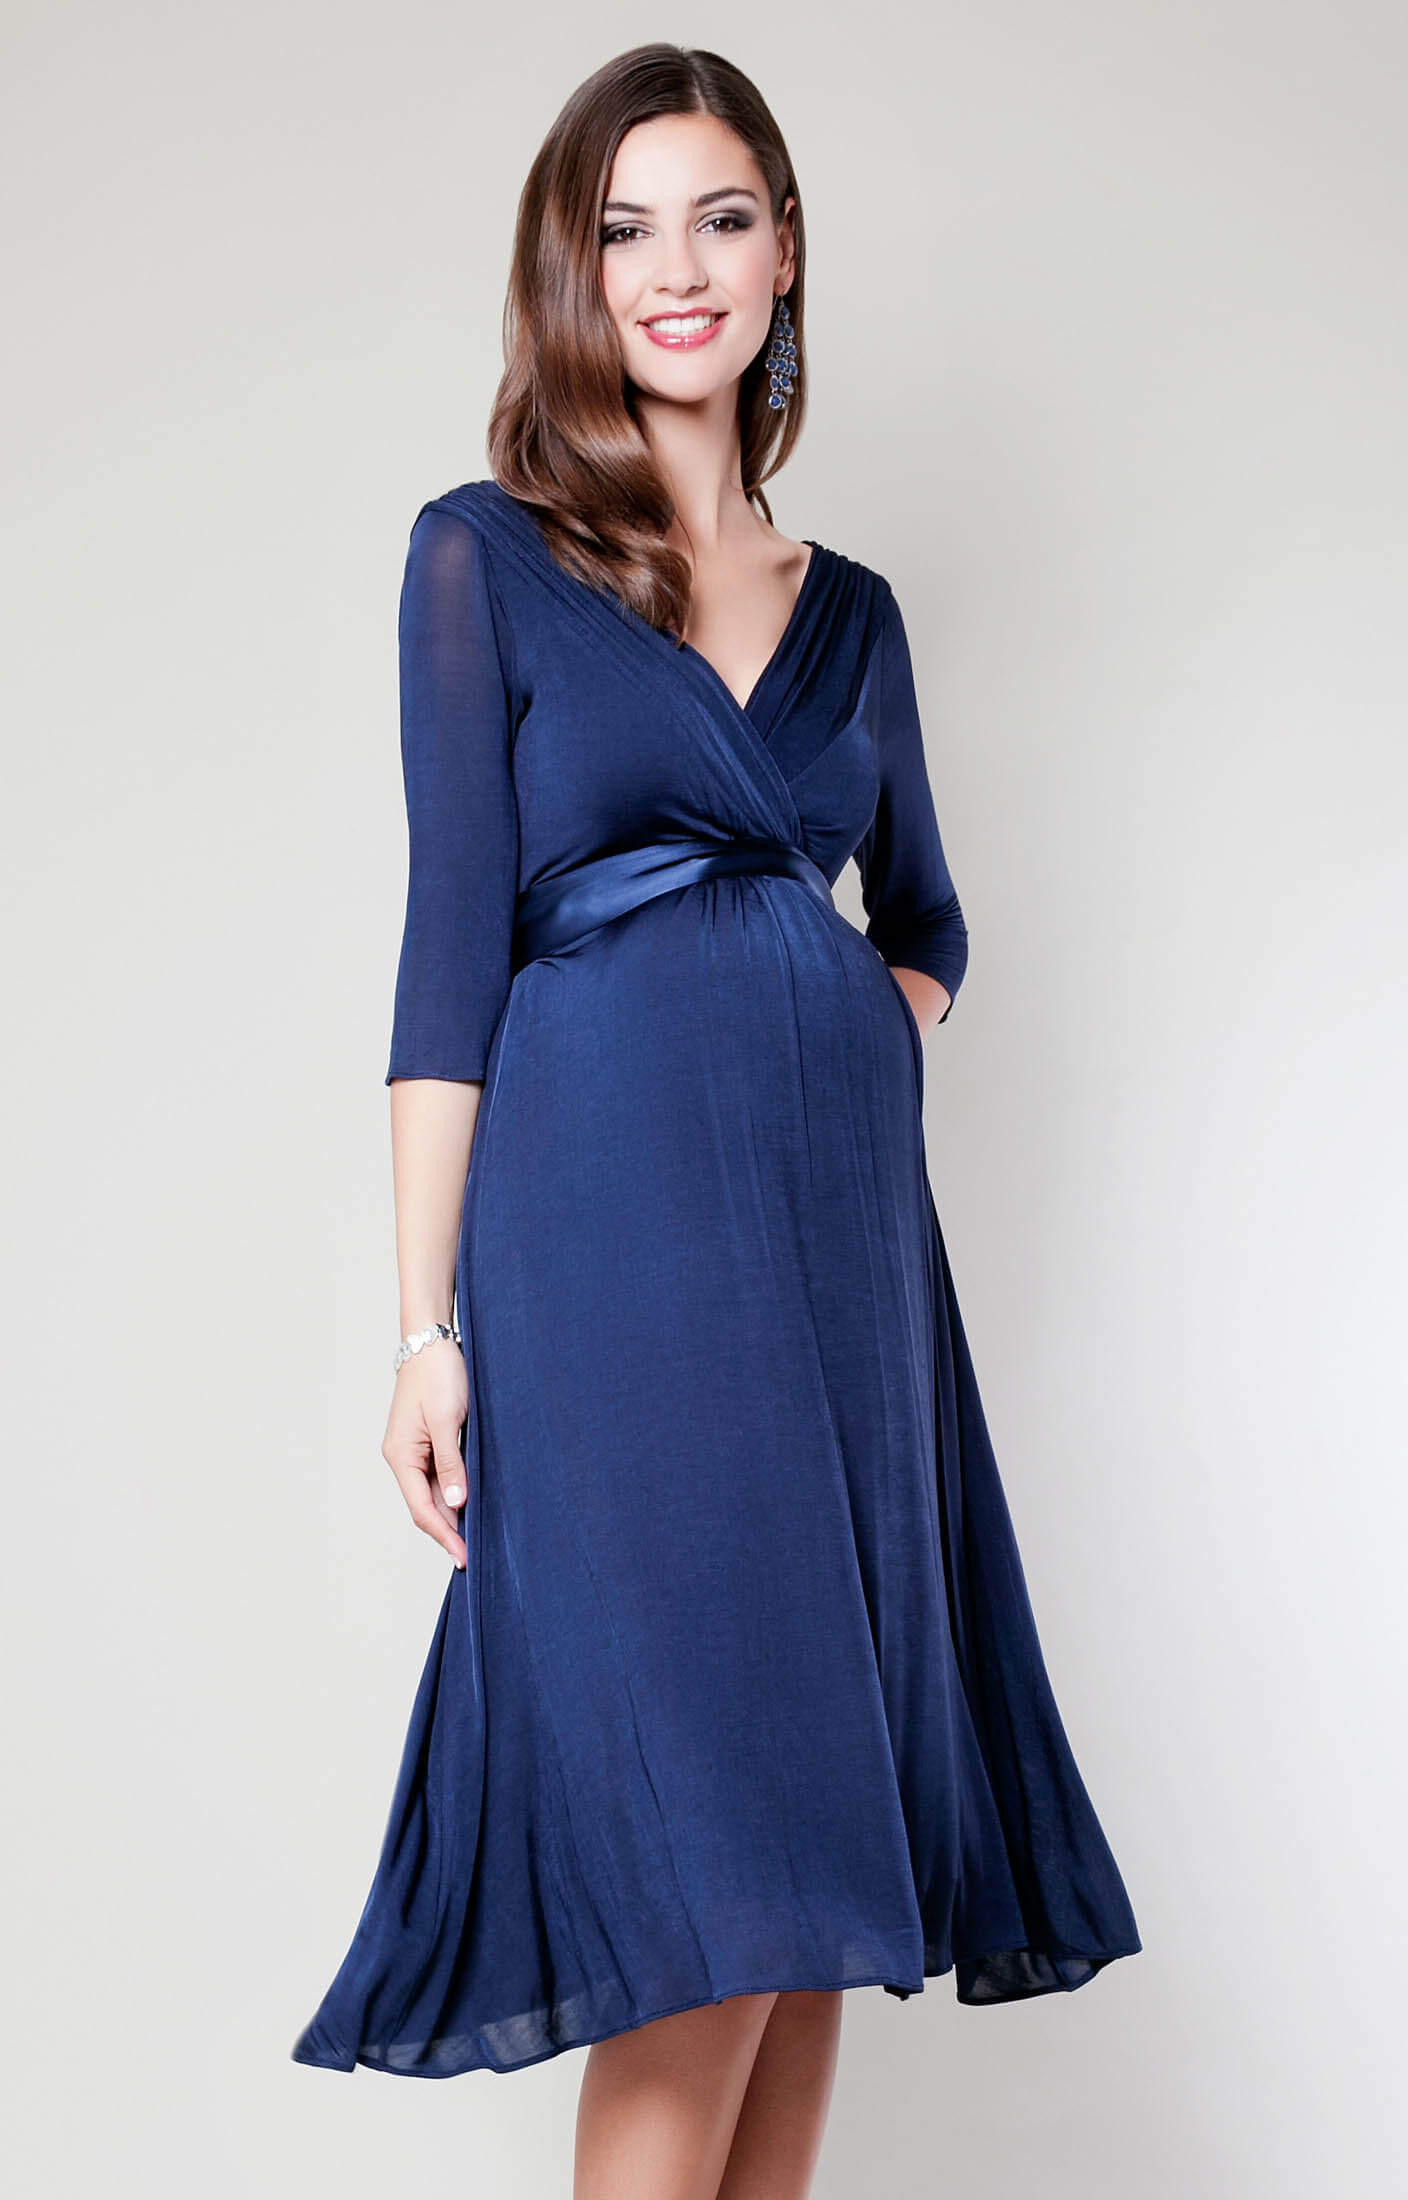 Maternity Dresses For Weddings Guests